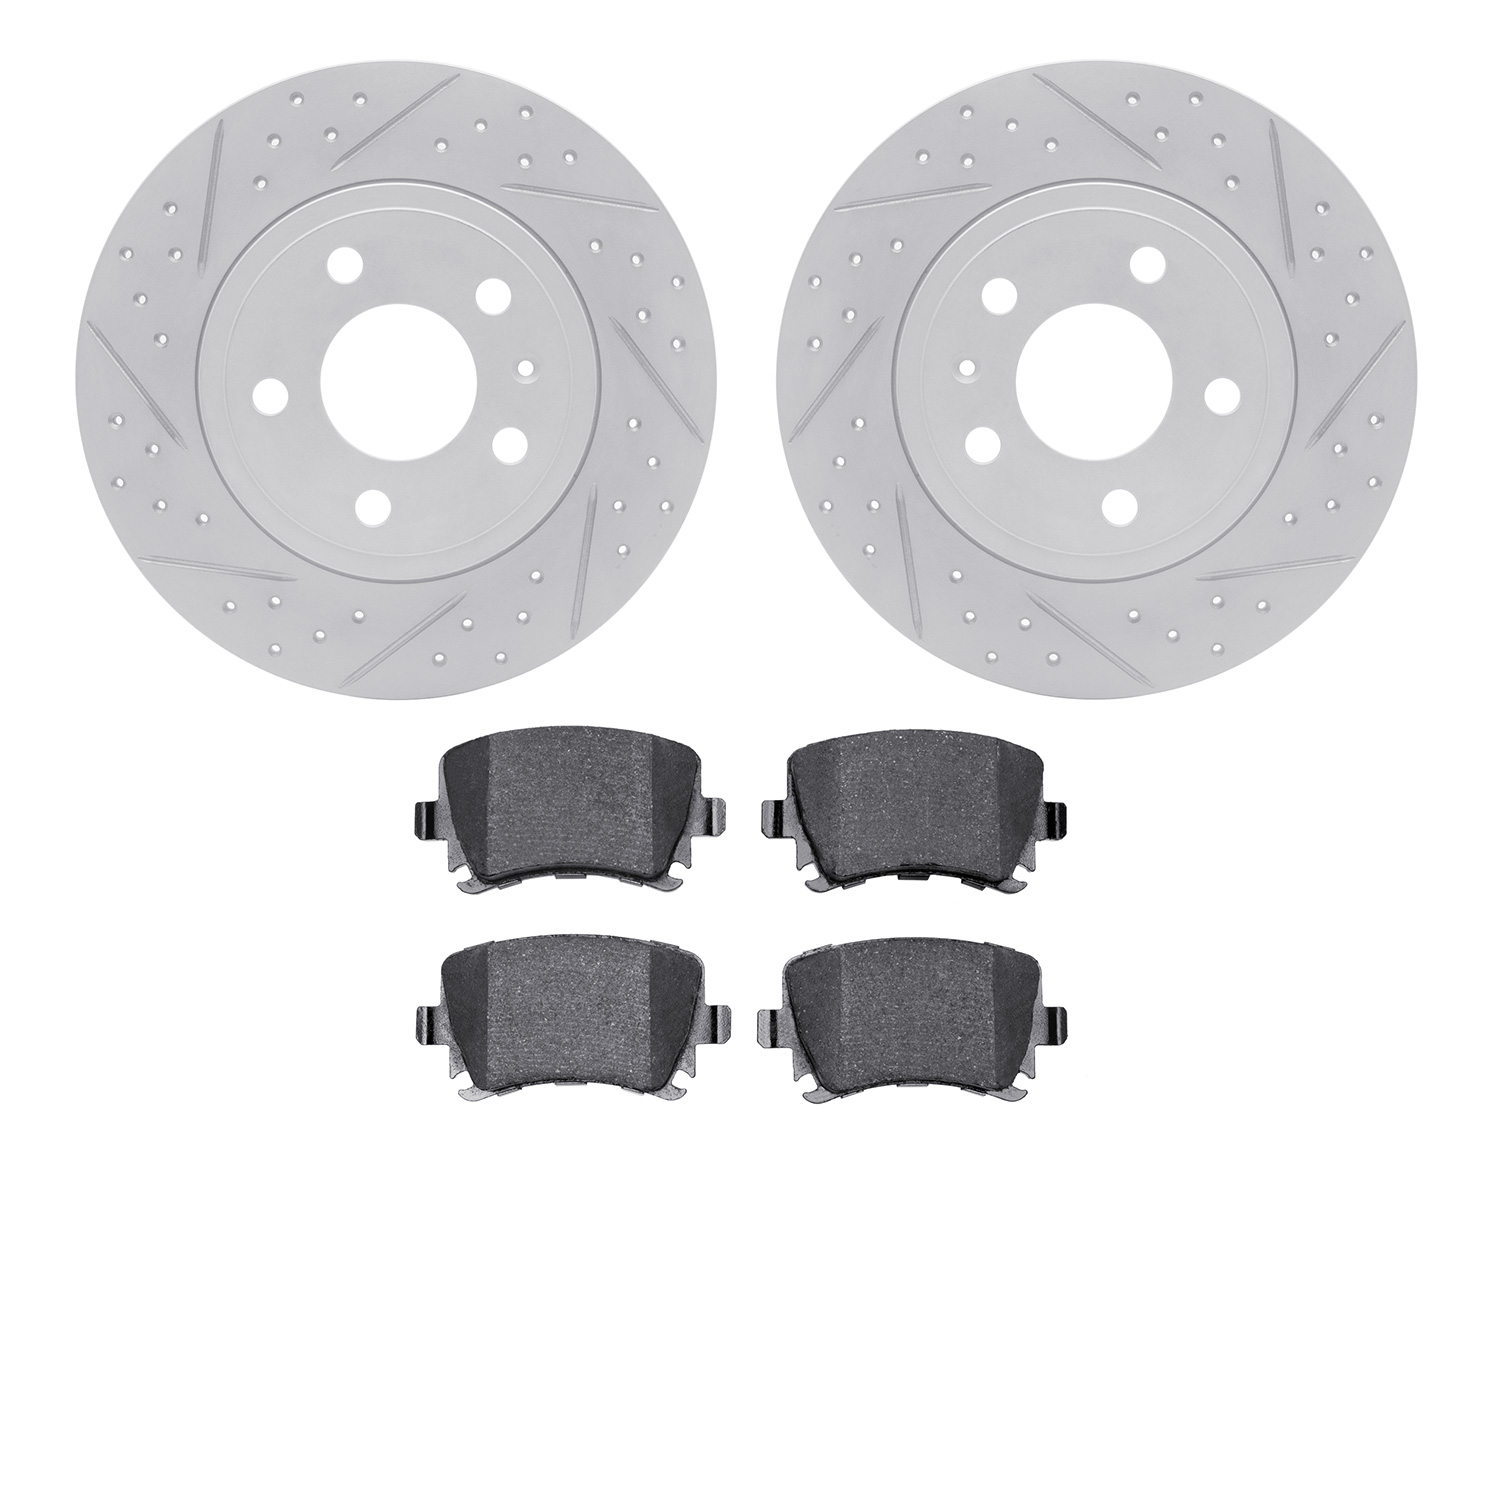 2502-73027 Geoperformance Drilled/Slotted Rotors w/5000 Advanced Brake Pads Kit, 2000-2008 Audi/Volkswagen, Position: Rear